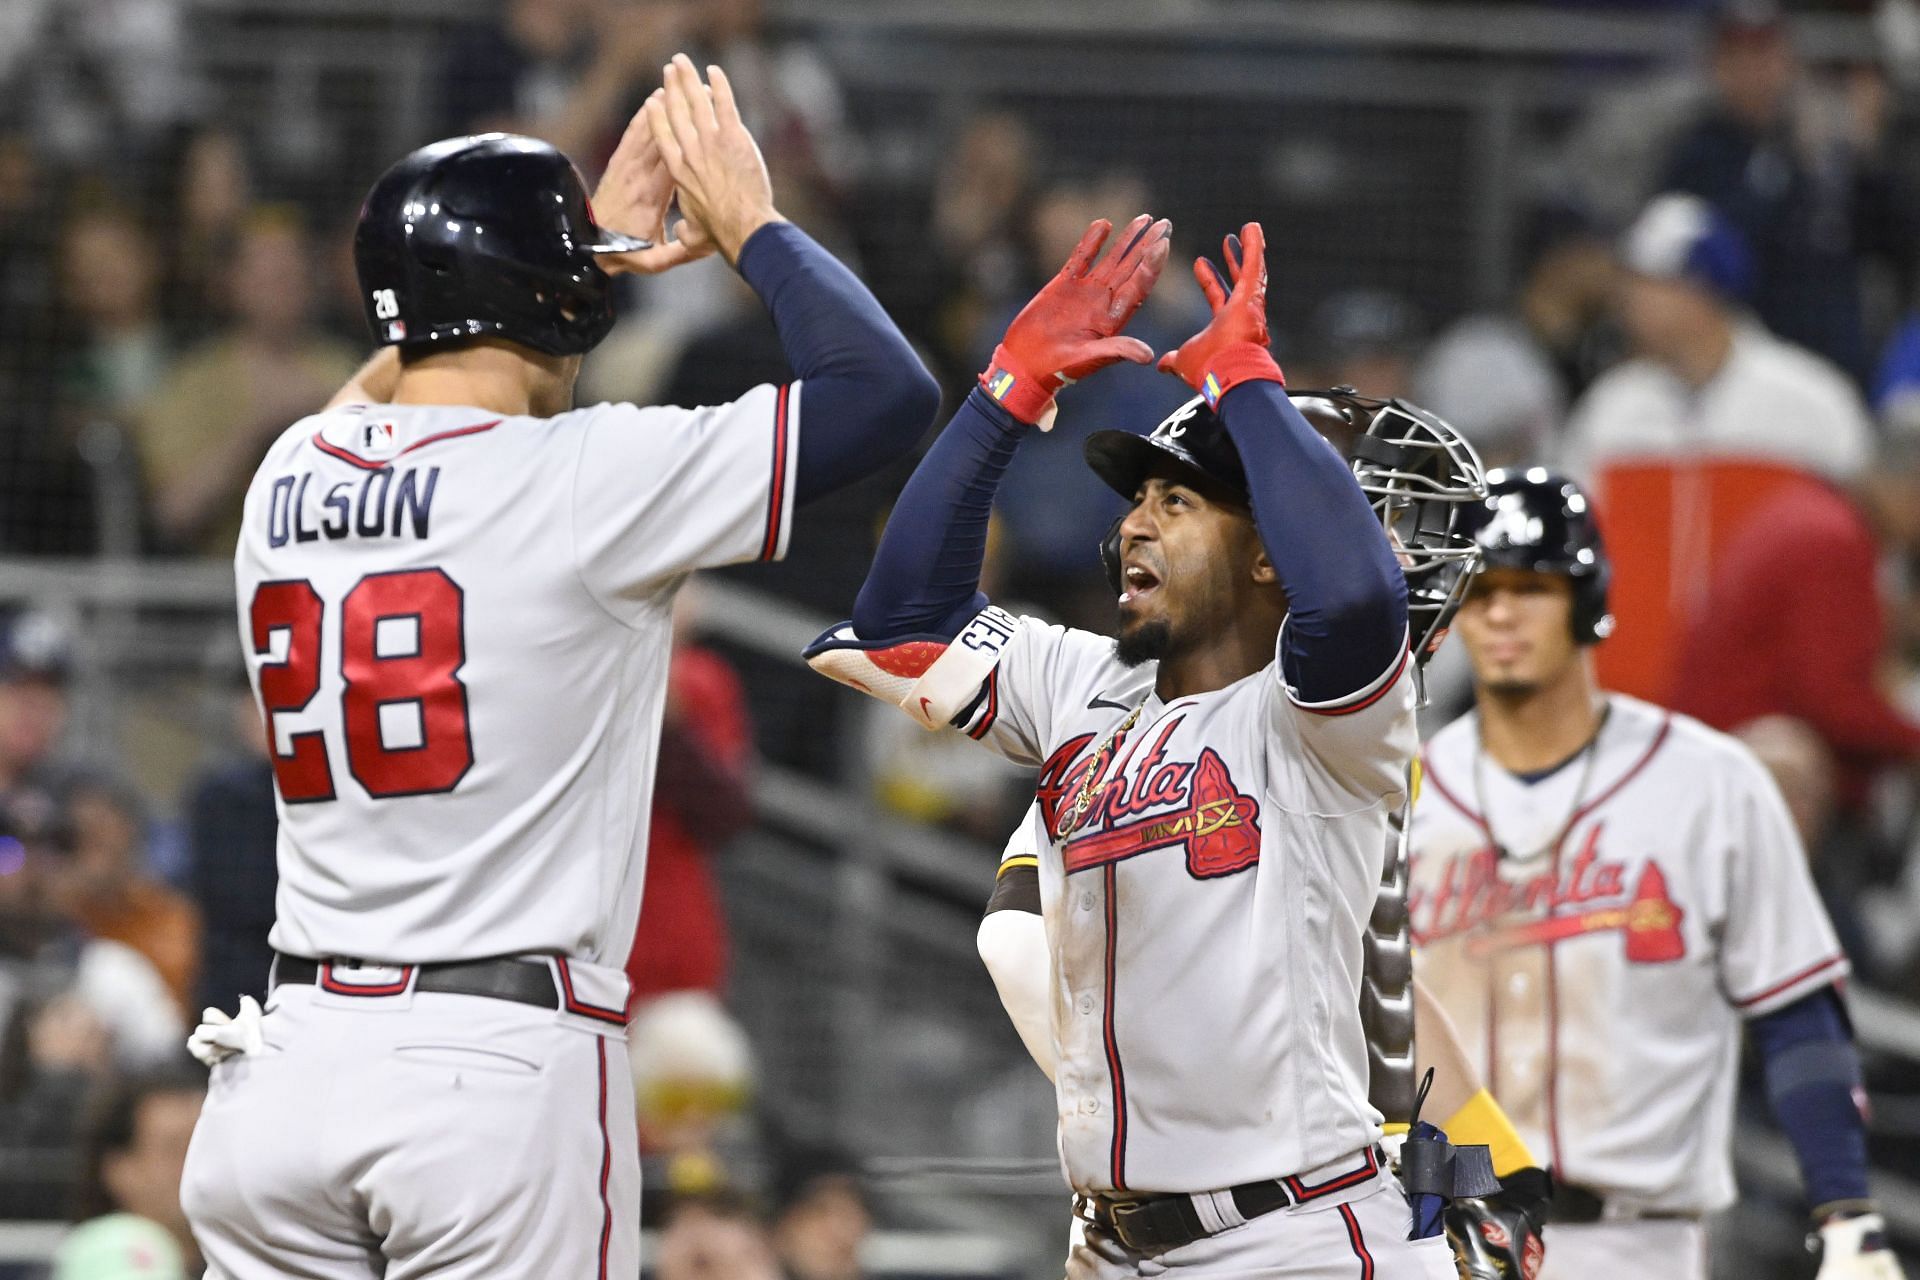 What Atlanta Braves fans think of the team as we start 2019